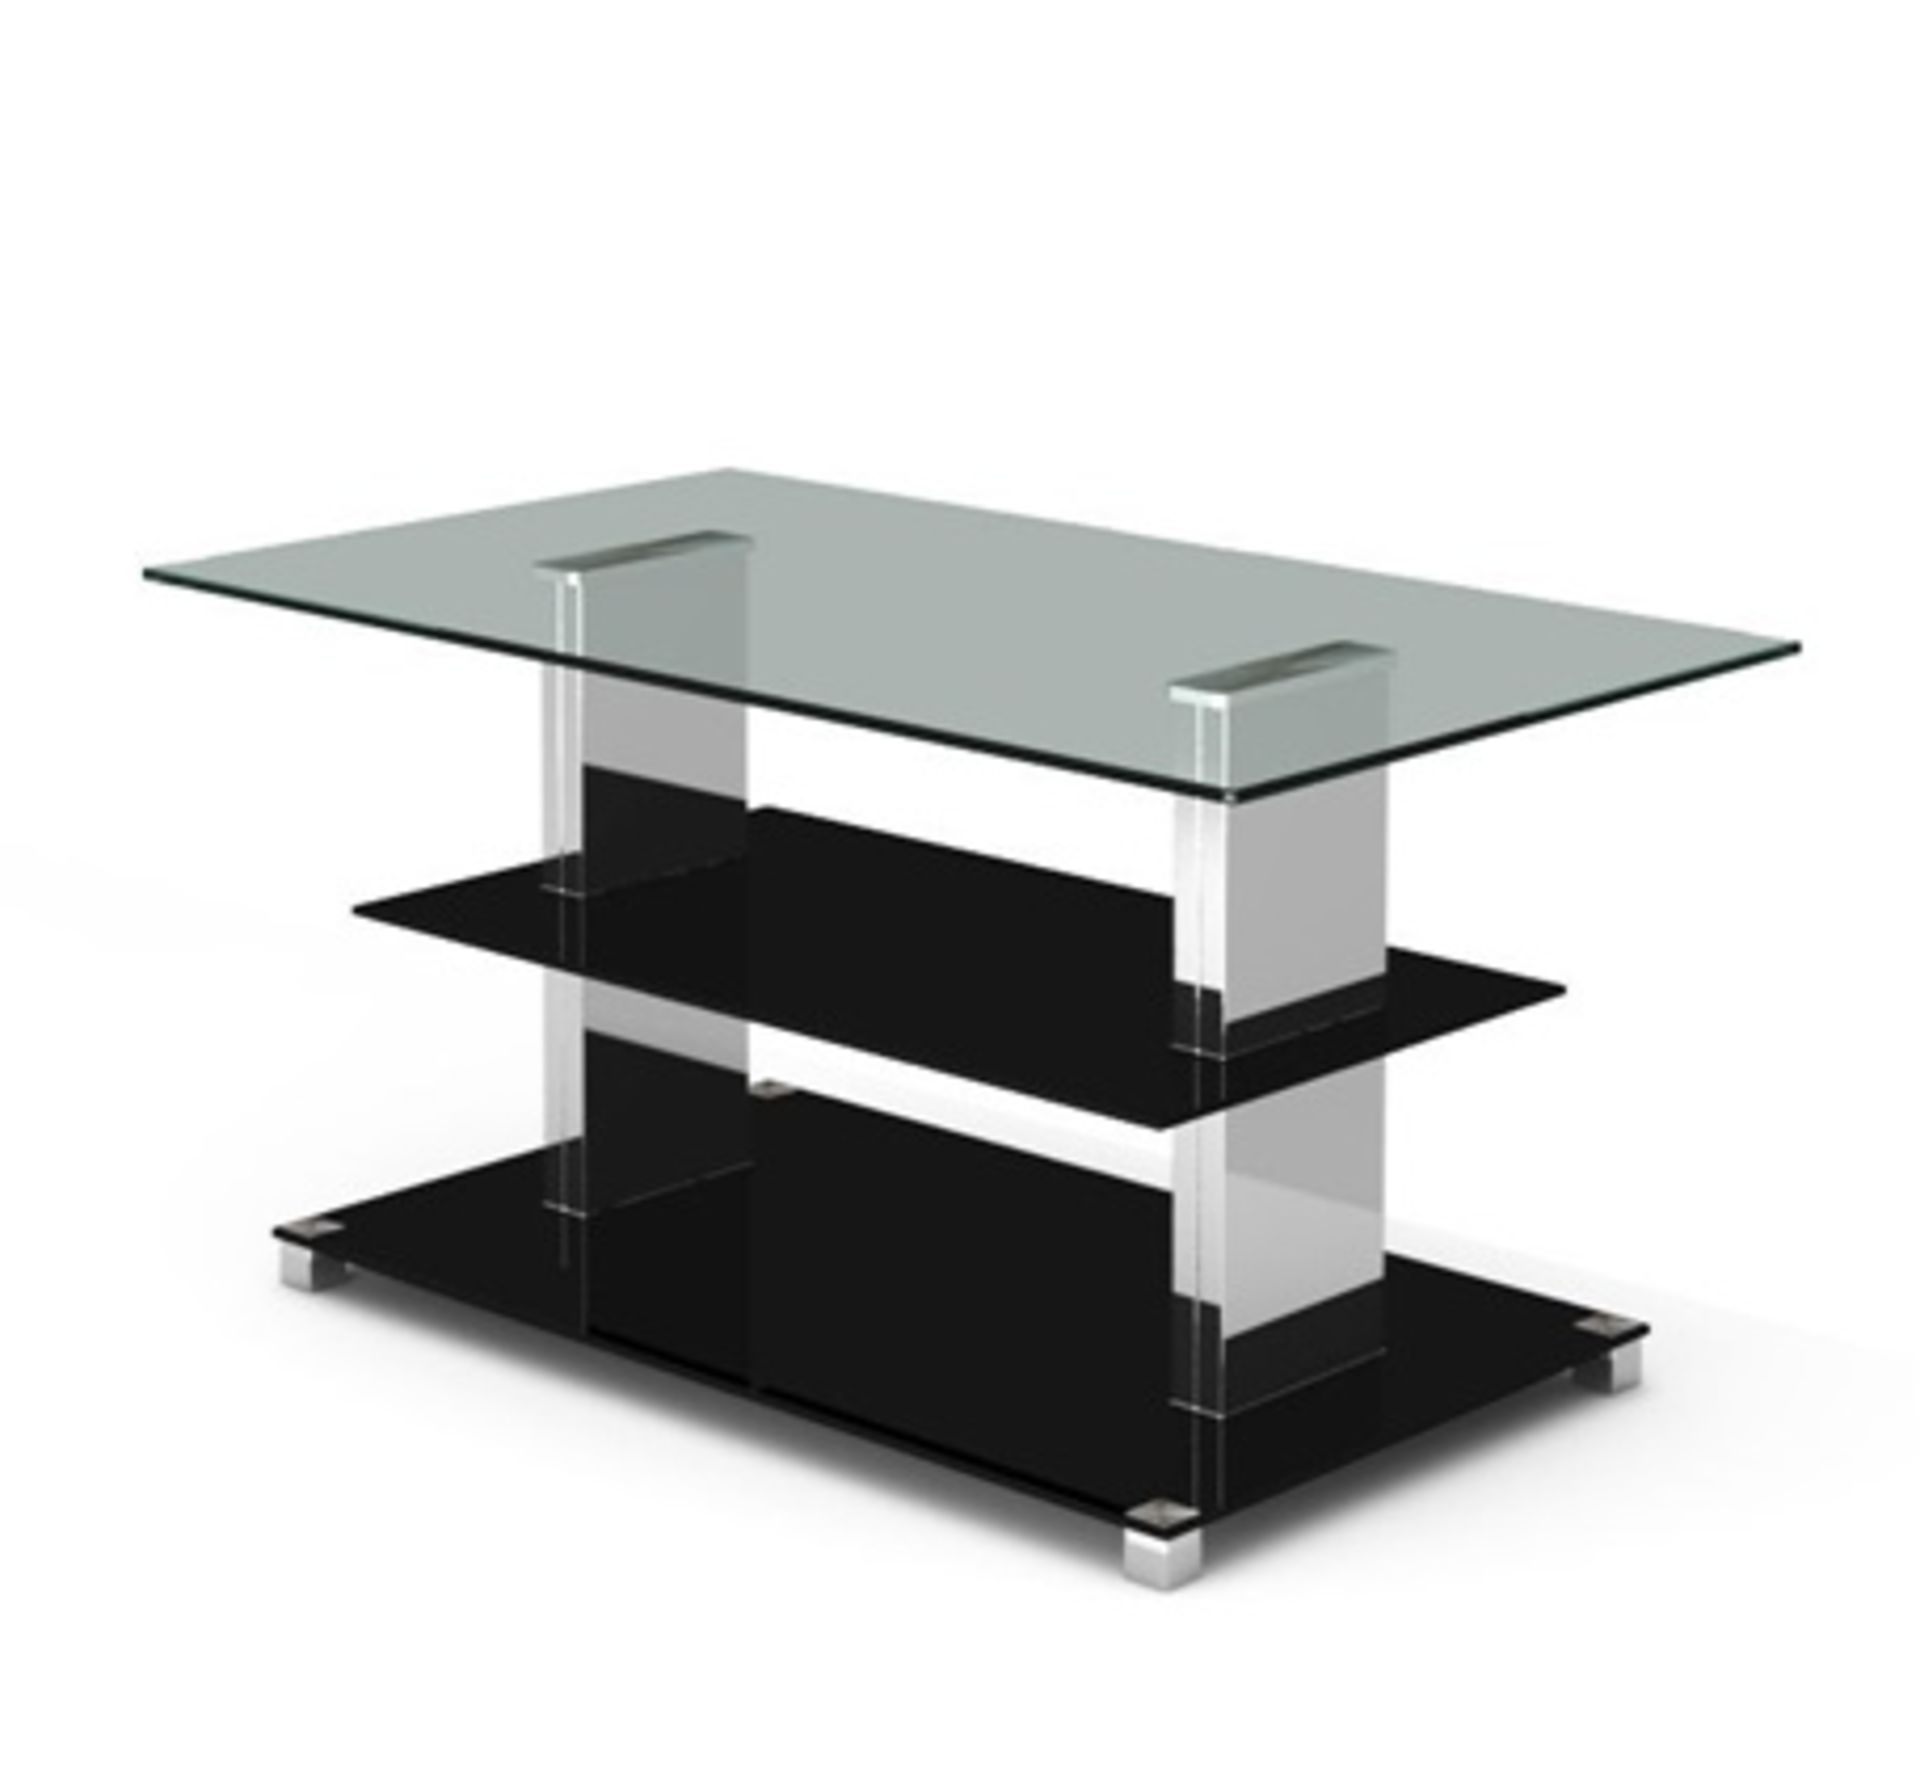 1 x Designer Glass Coffee Table CTB422 (Brand New & Boxed)